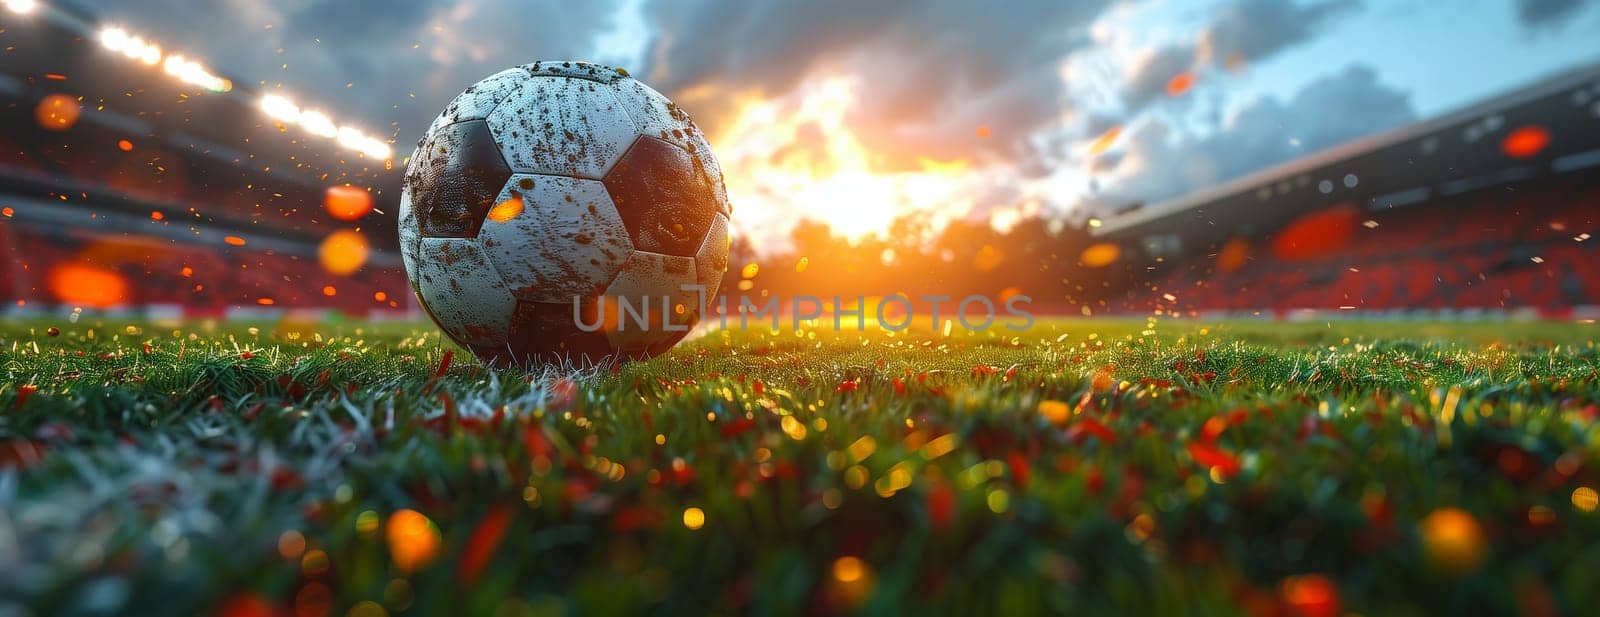 Soccer ball soaring across the grassy field under the cloudy sky by richwolf